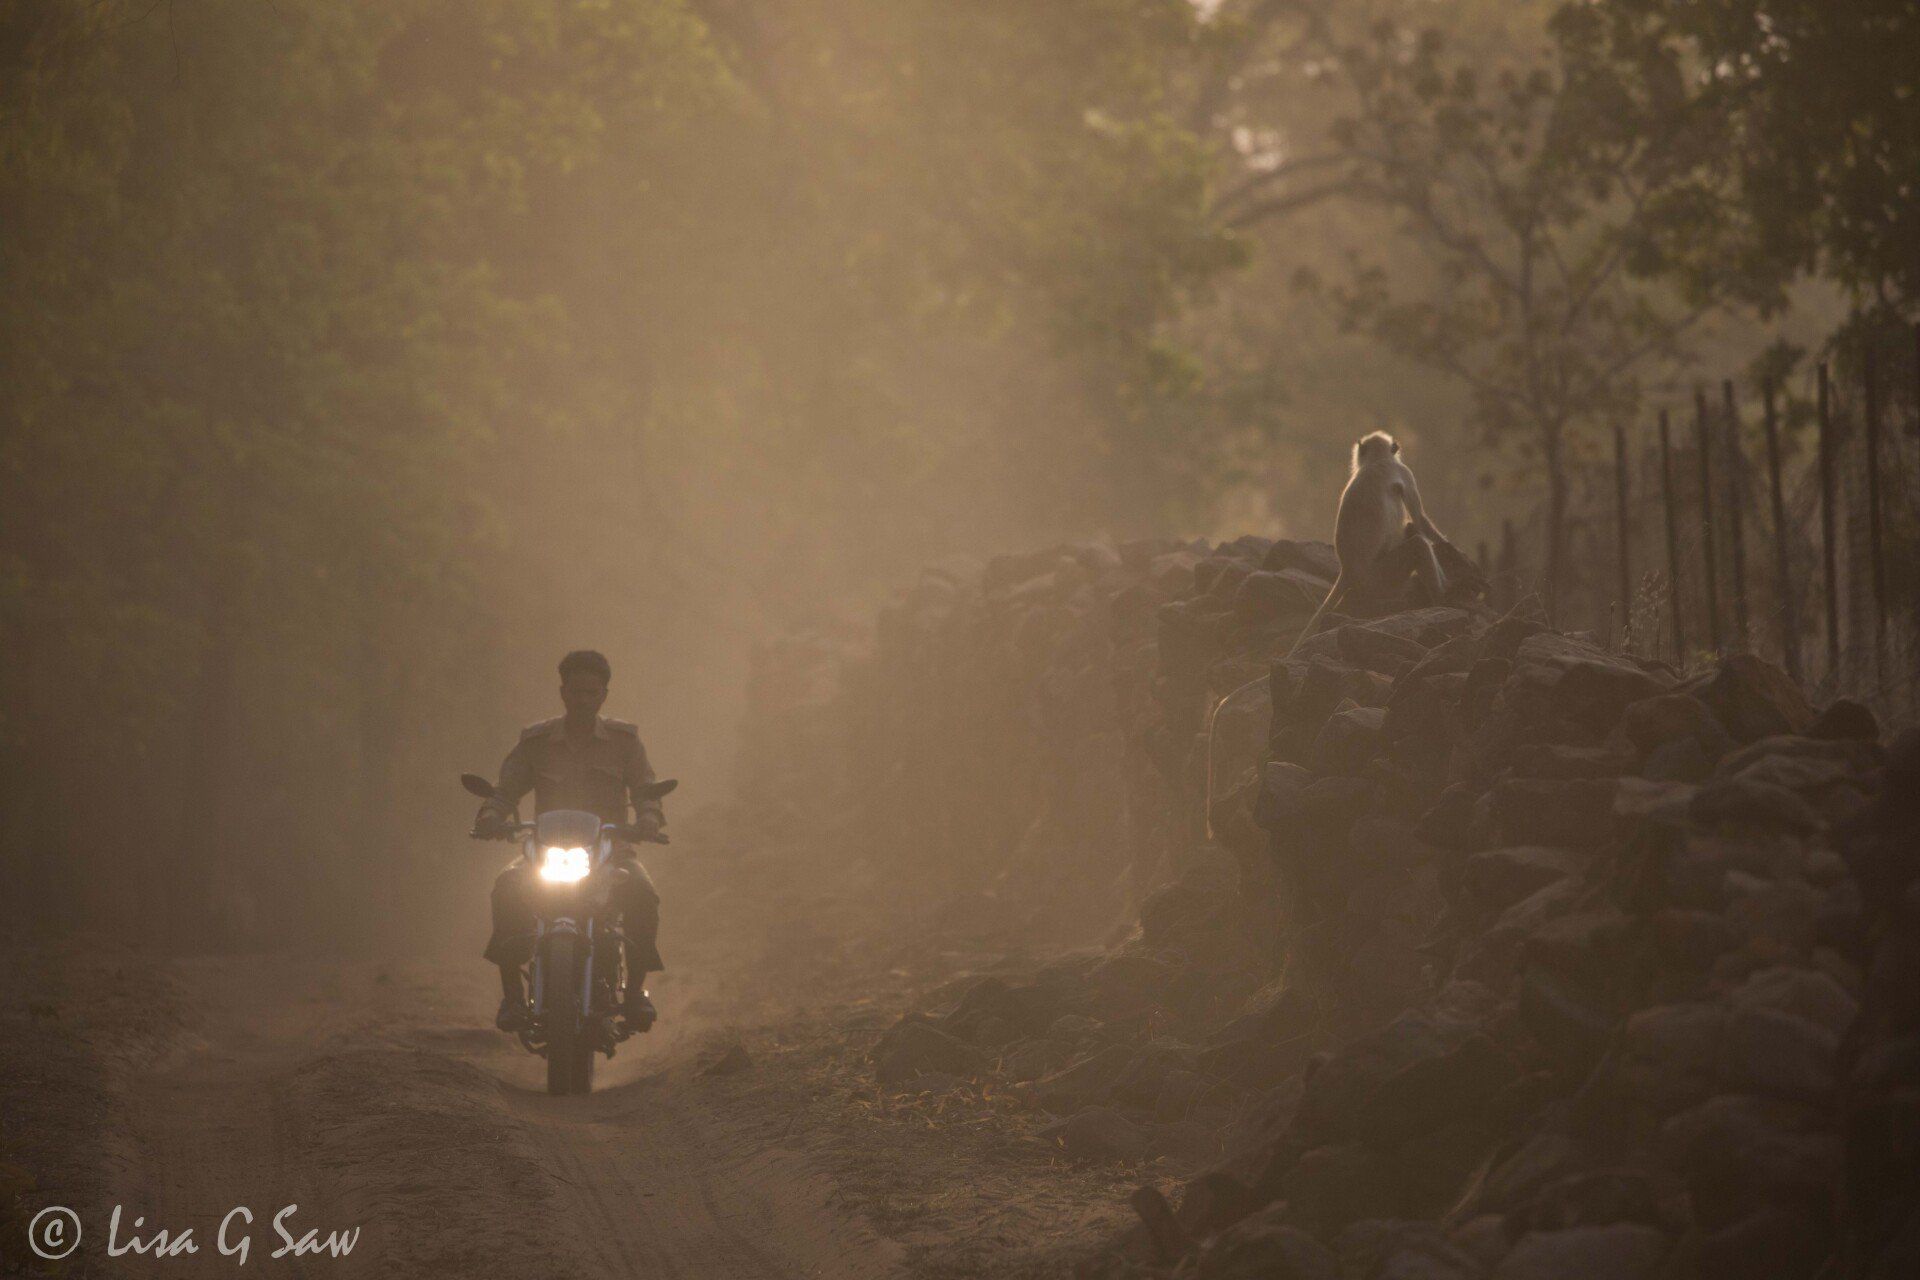 Motorcyclist and langur in cloud of dust